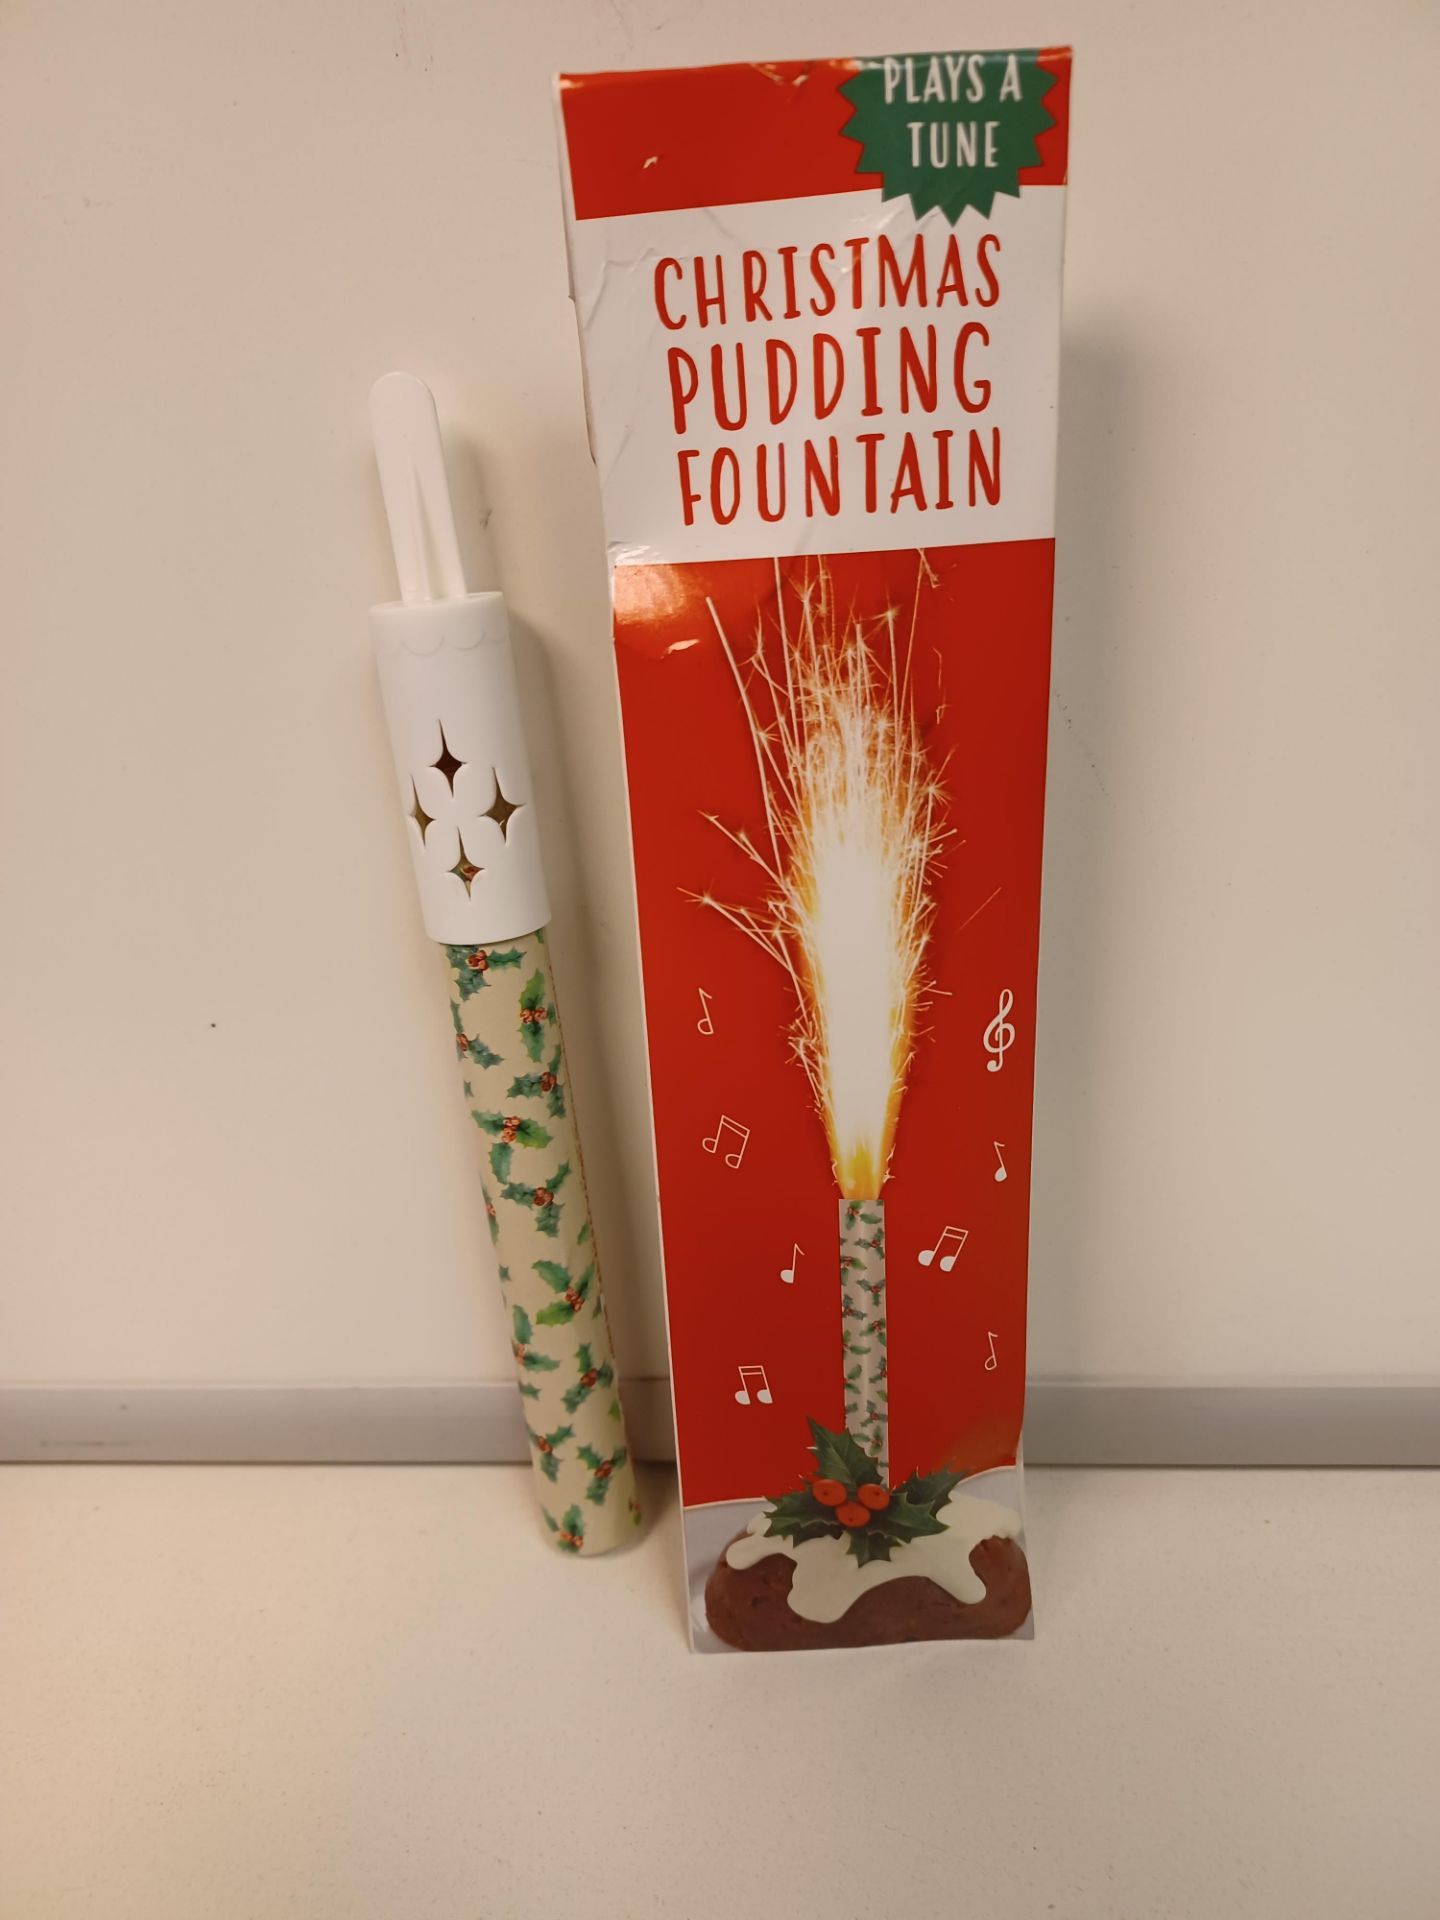 80 X NEW PACKAGED CHRISTMAS PUDDING FOUNTAINS - PLAYS A TUNE. RRP £6.99 EACH (ROW13 TOP)